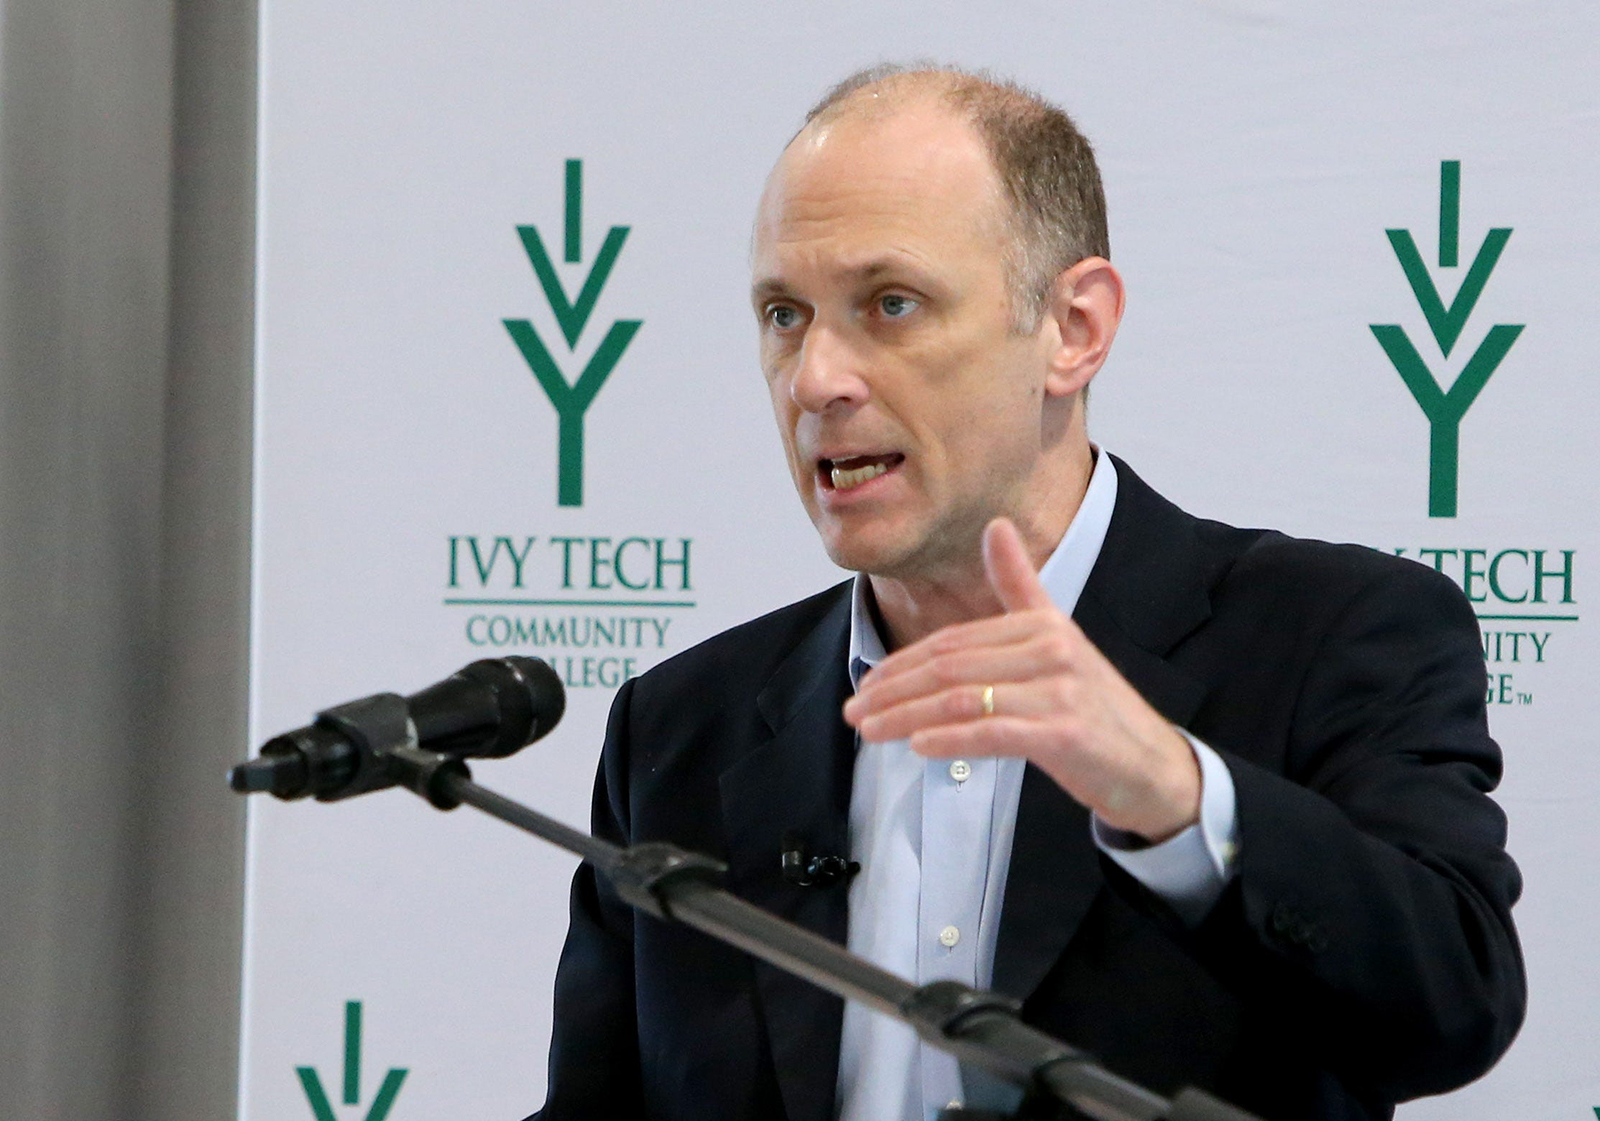 Austan Goolsbee speaks at Ivy Tech Community College in Indiana, on February 28. 